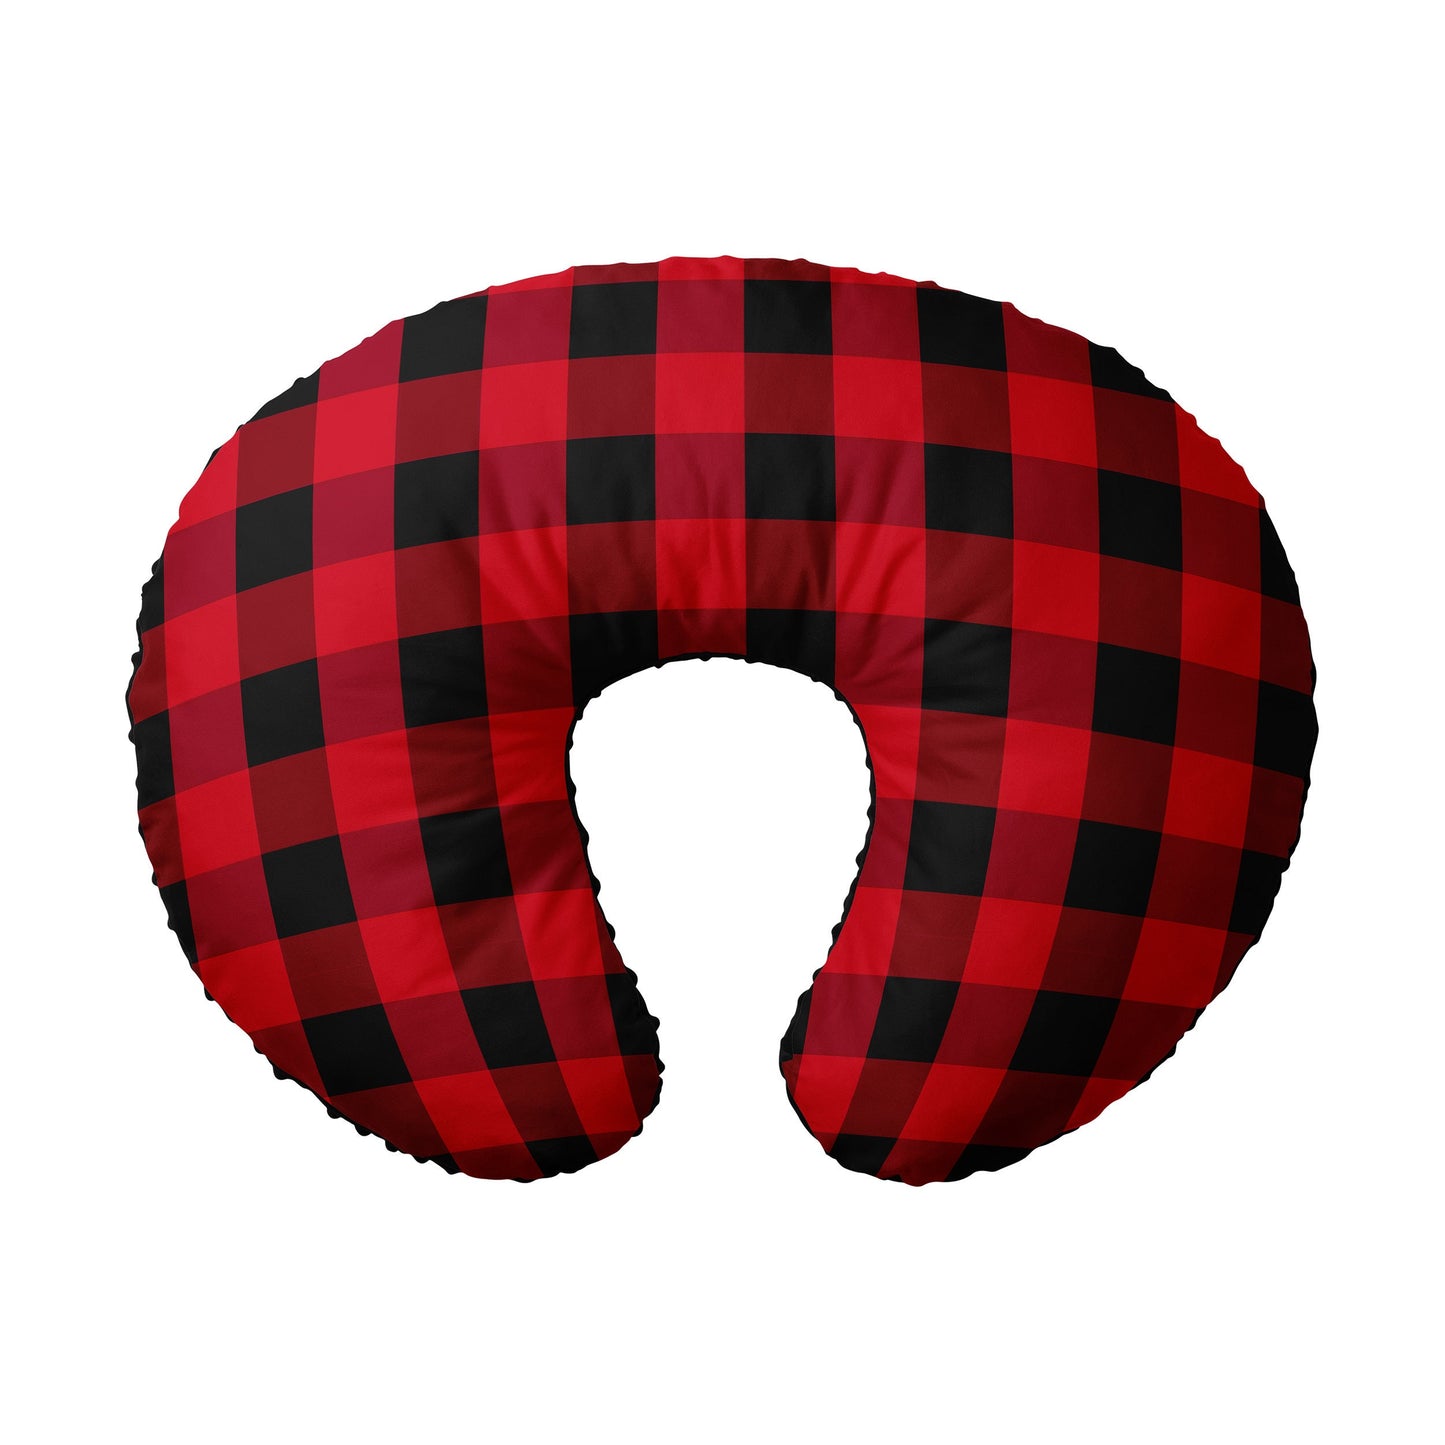 Nursing Pillow Cover,100%Cotton,Slipcover Minky Boy Girl-Woodland Nursery Decor for Baby Boys and Girls Pillow Cover Red Plaid Squares Cabin